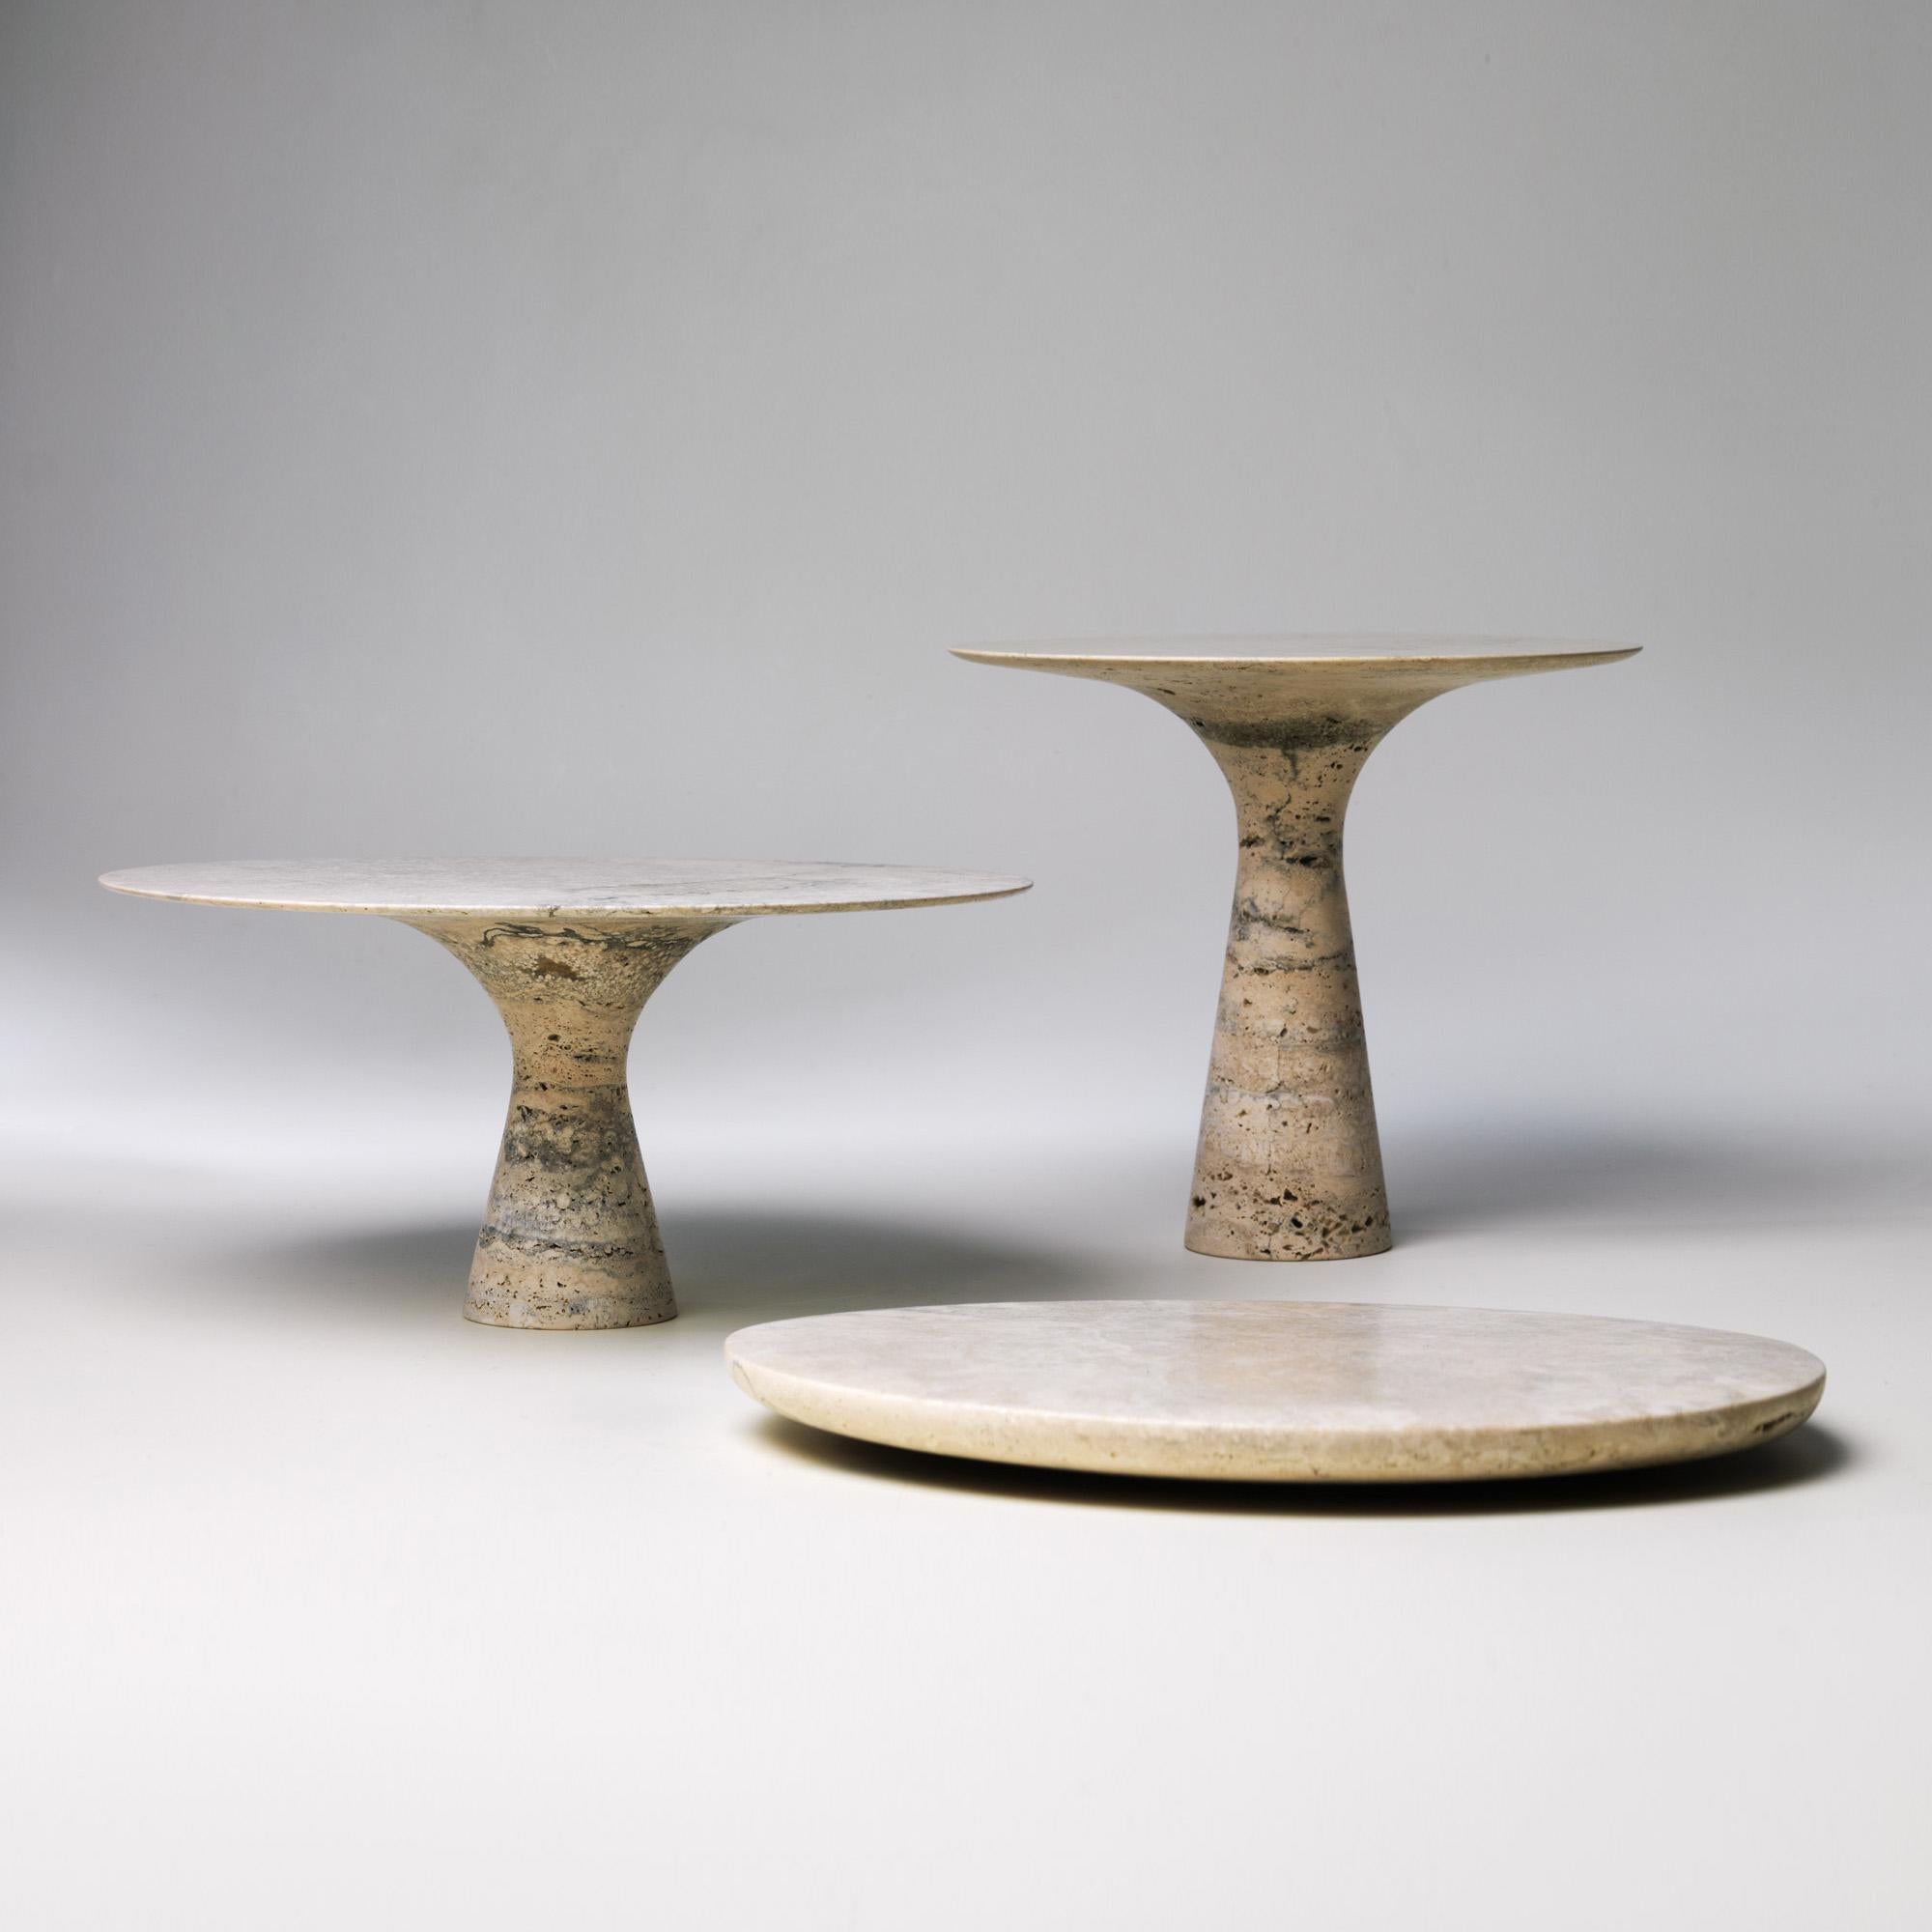 Set of 3 Refined Contemporary Marble Travertino Silver Cake Stands and Plate
Signed by Leo Aerts.
Dimensions: 
D 26 x H 22.5 cm 
D 32 x H 15 cm
D 32 x H 2 cm
Material: Travertino Silver marble
Technique: Polished, carved. 

Available in marble: